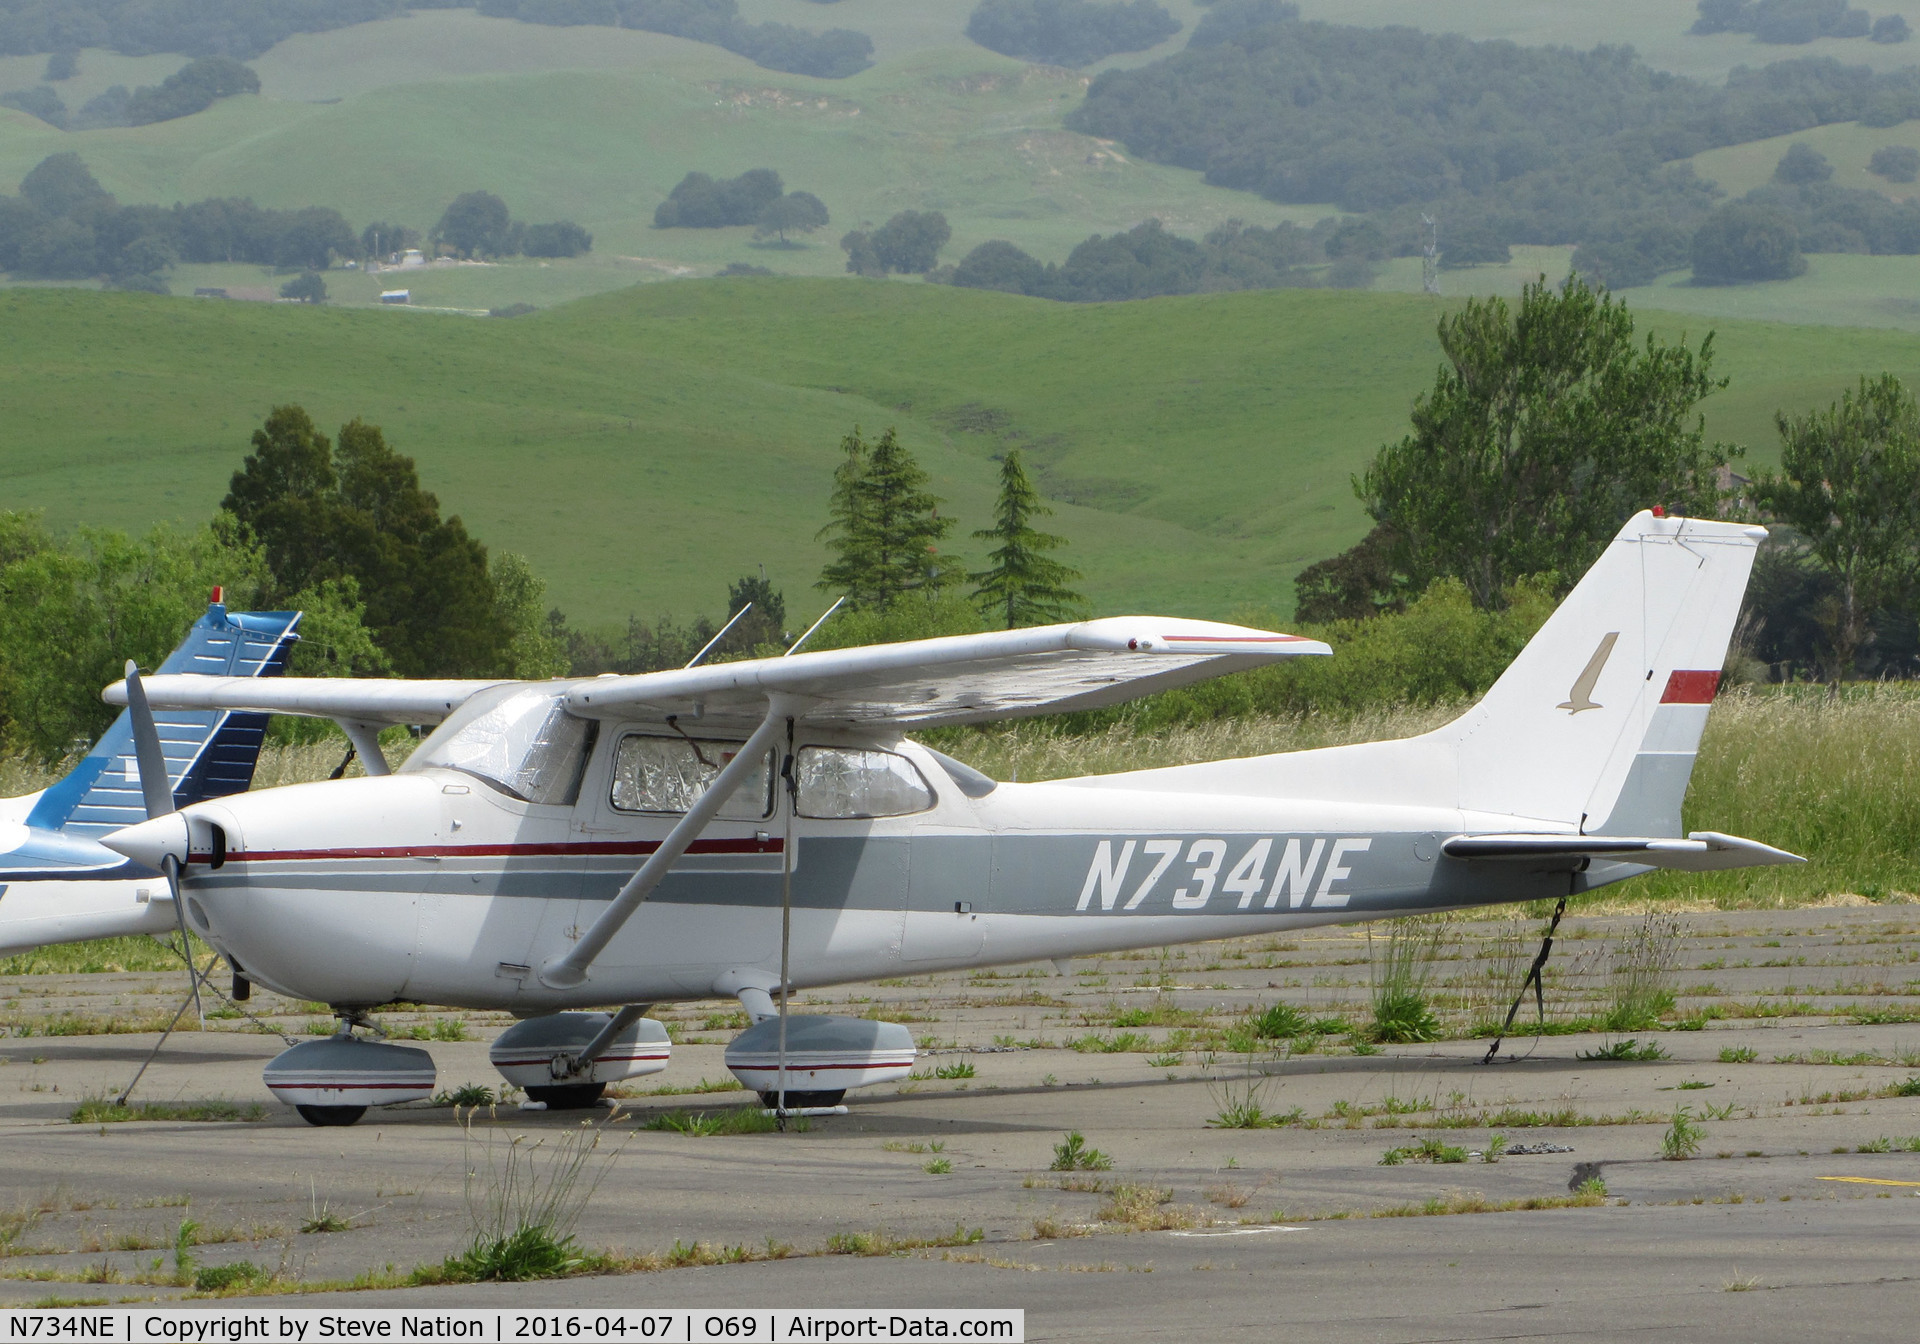 N734NE, 1977 Cessna 172N C/N 17268977, April 2016 After the Winter Rains Came! Locally-based 1977 Cessna 172N rests on the ramp @ Petaluma Municipal Airport, CA home base. Compare how the foothills look here with my October 2005 photo of the same aircraft, same location.